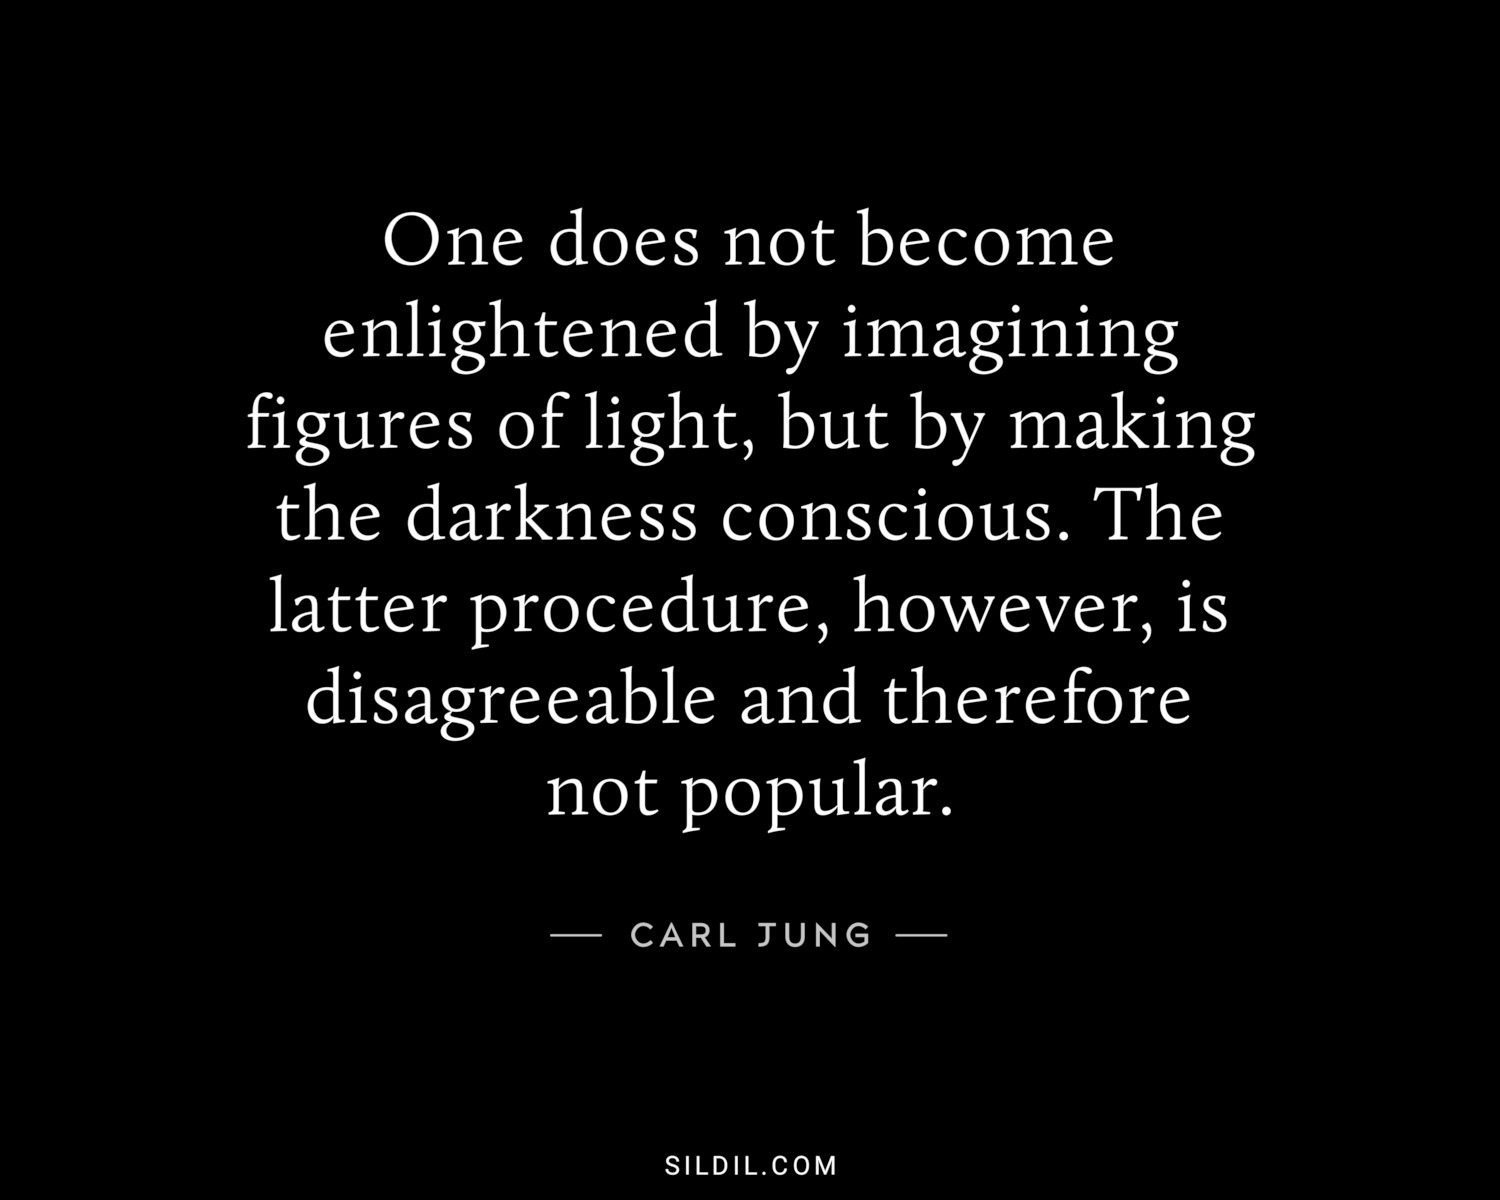 One does not become enlightened by imagining figures of light, but by making the darkness conscious. The latter procedure, however, is disagreeable and therefore not popular.